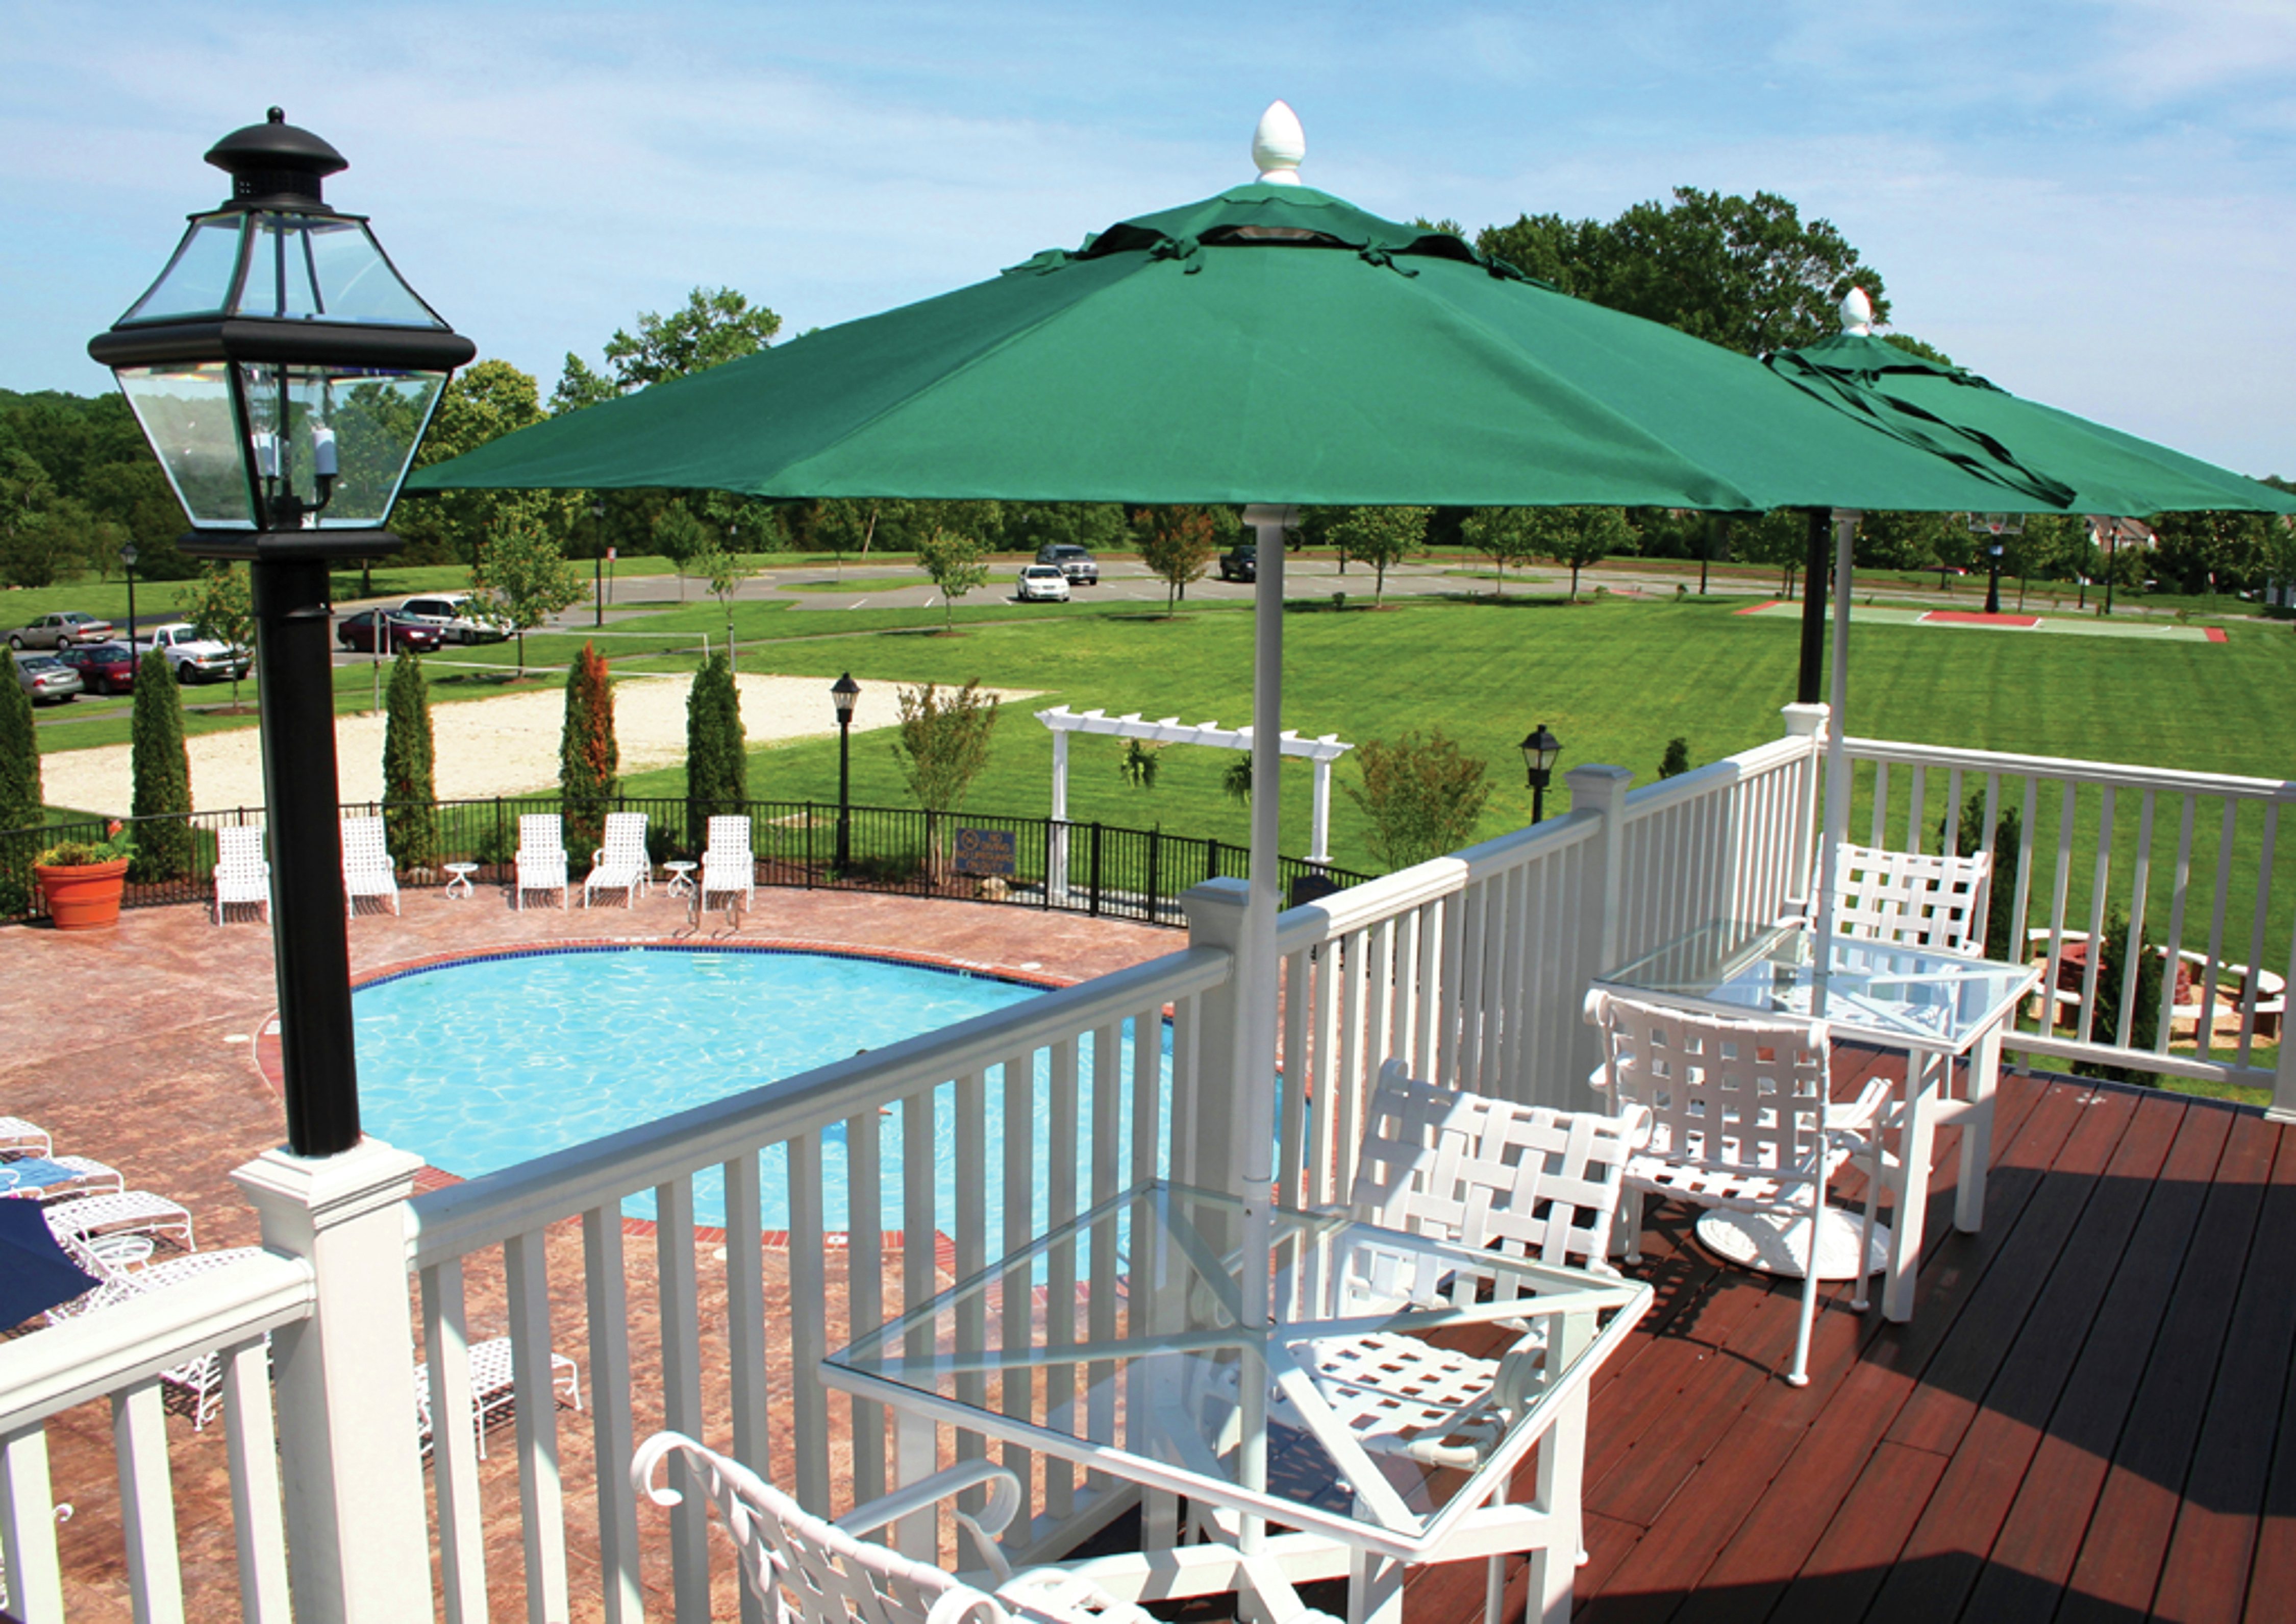 Deck with Umbrella-Covered Tables Overlooking Pool and Field